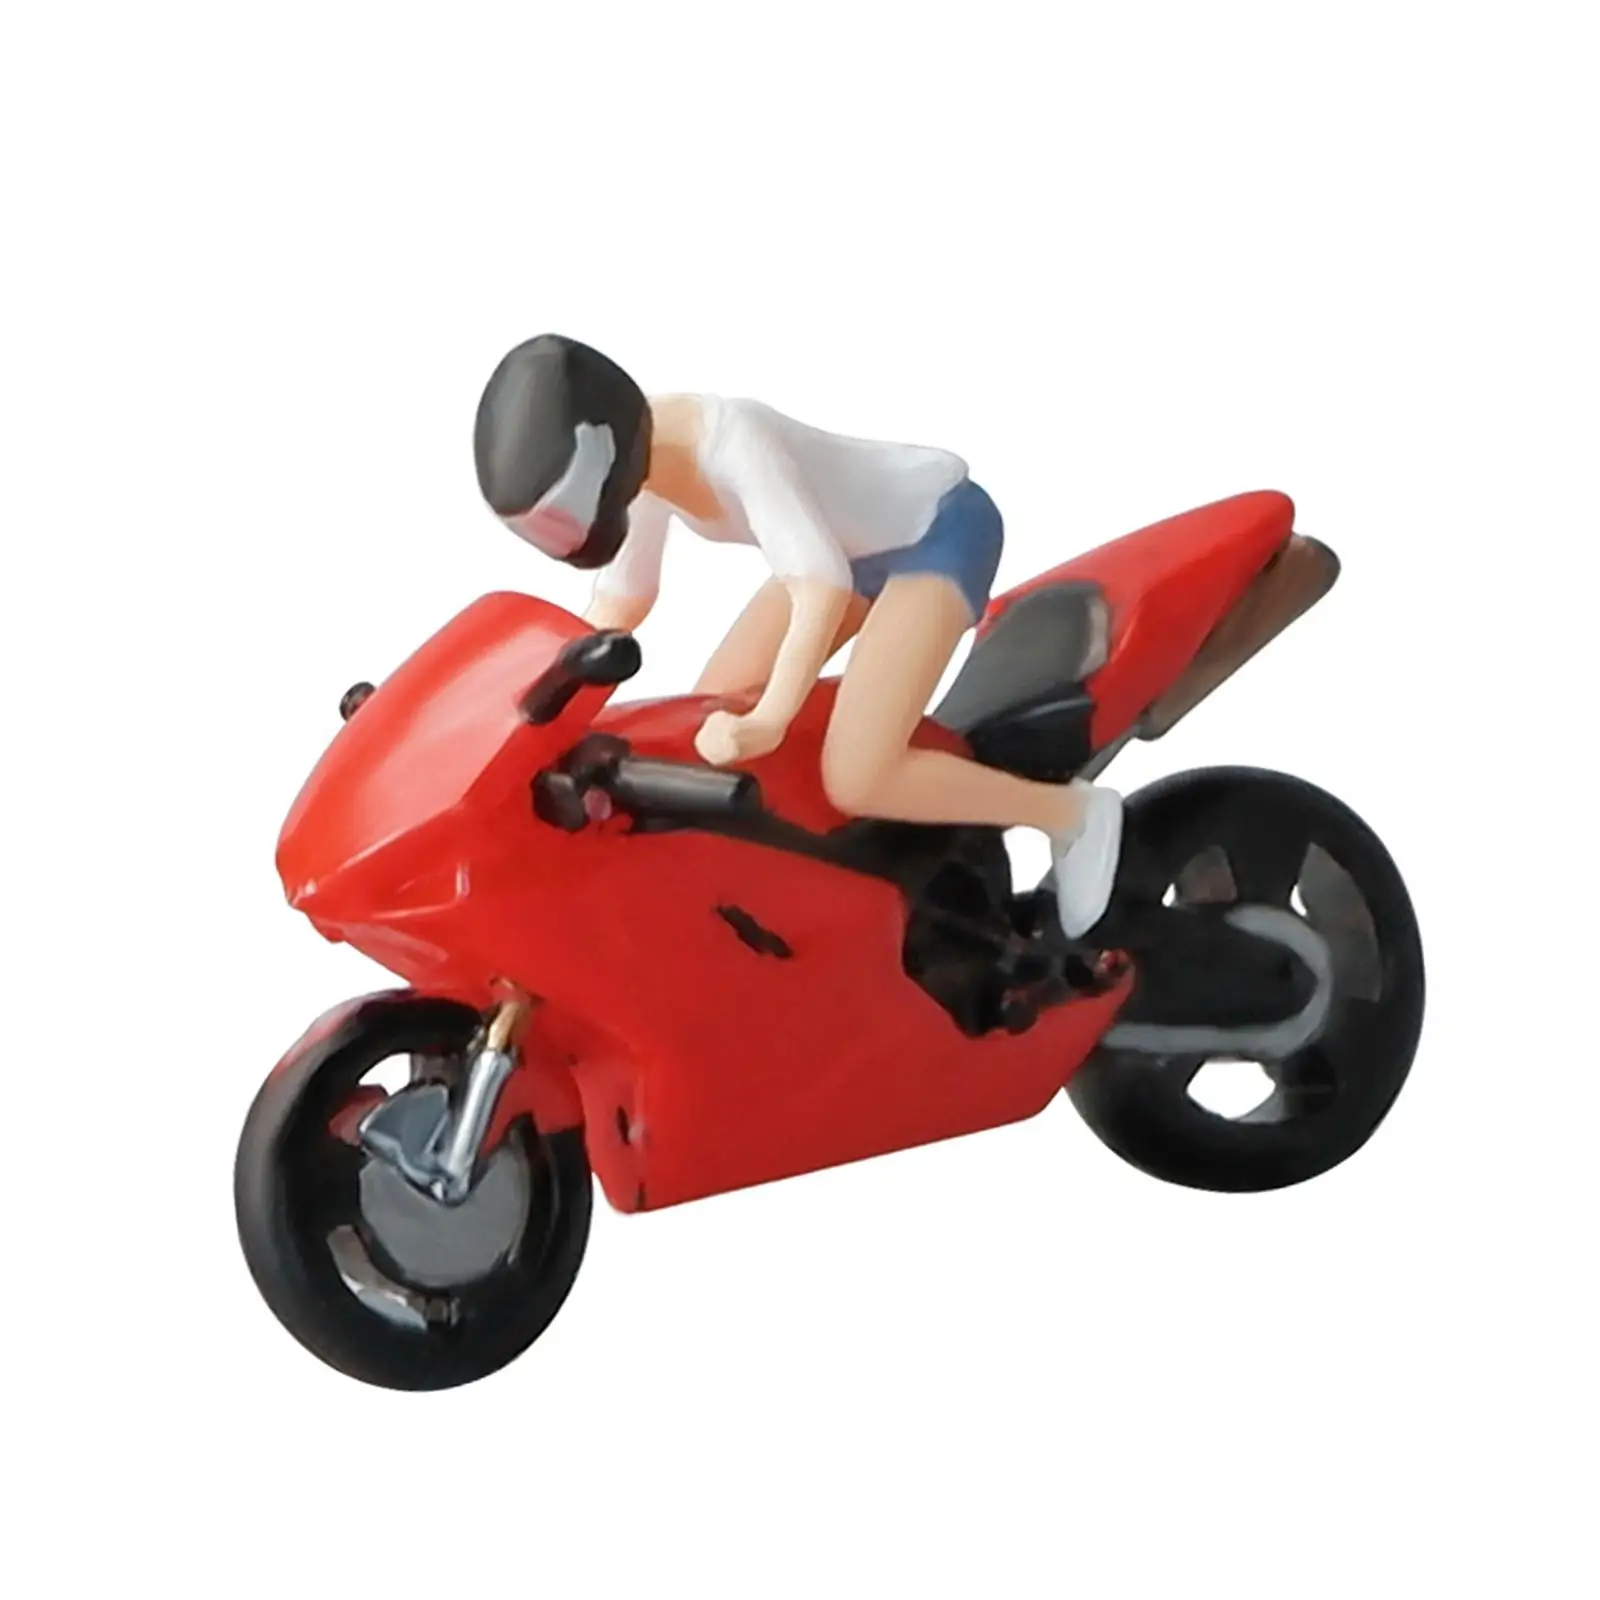 1/64 Model People Figures Ornament Realistic Figures 1/64 Motorcycle and Figures Model DIY Scene Decor Micro Landscapes Decor